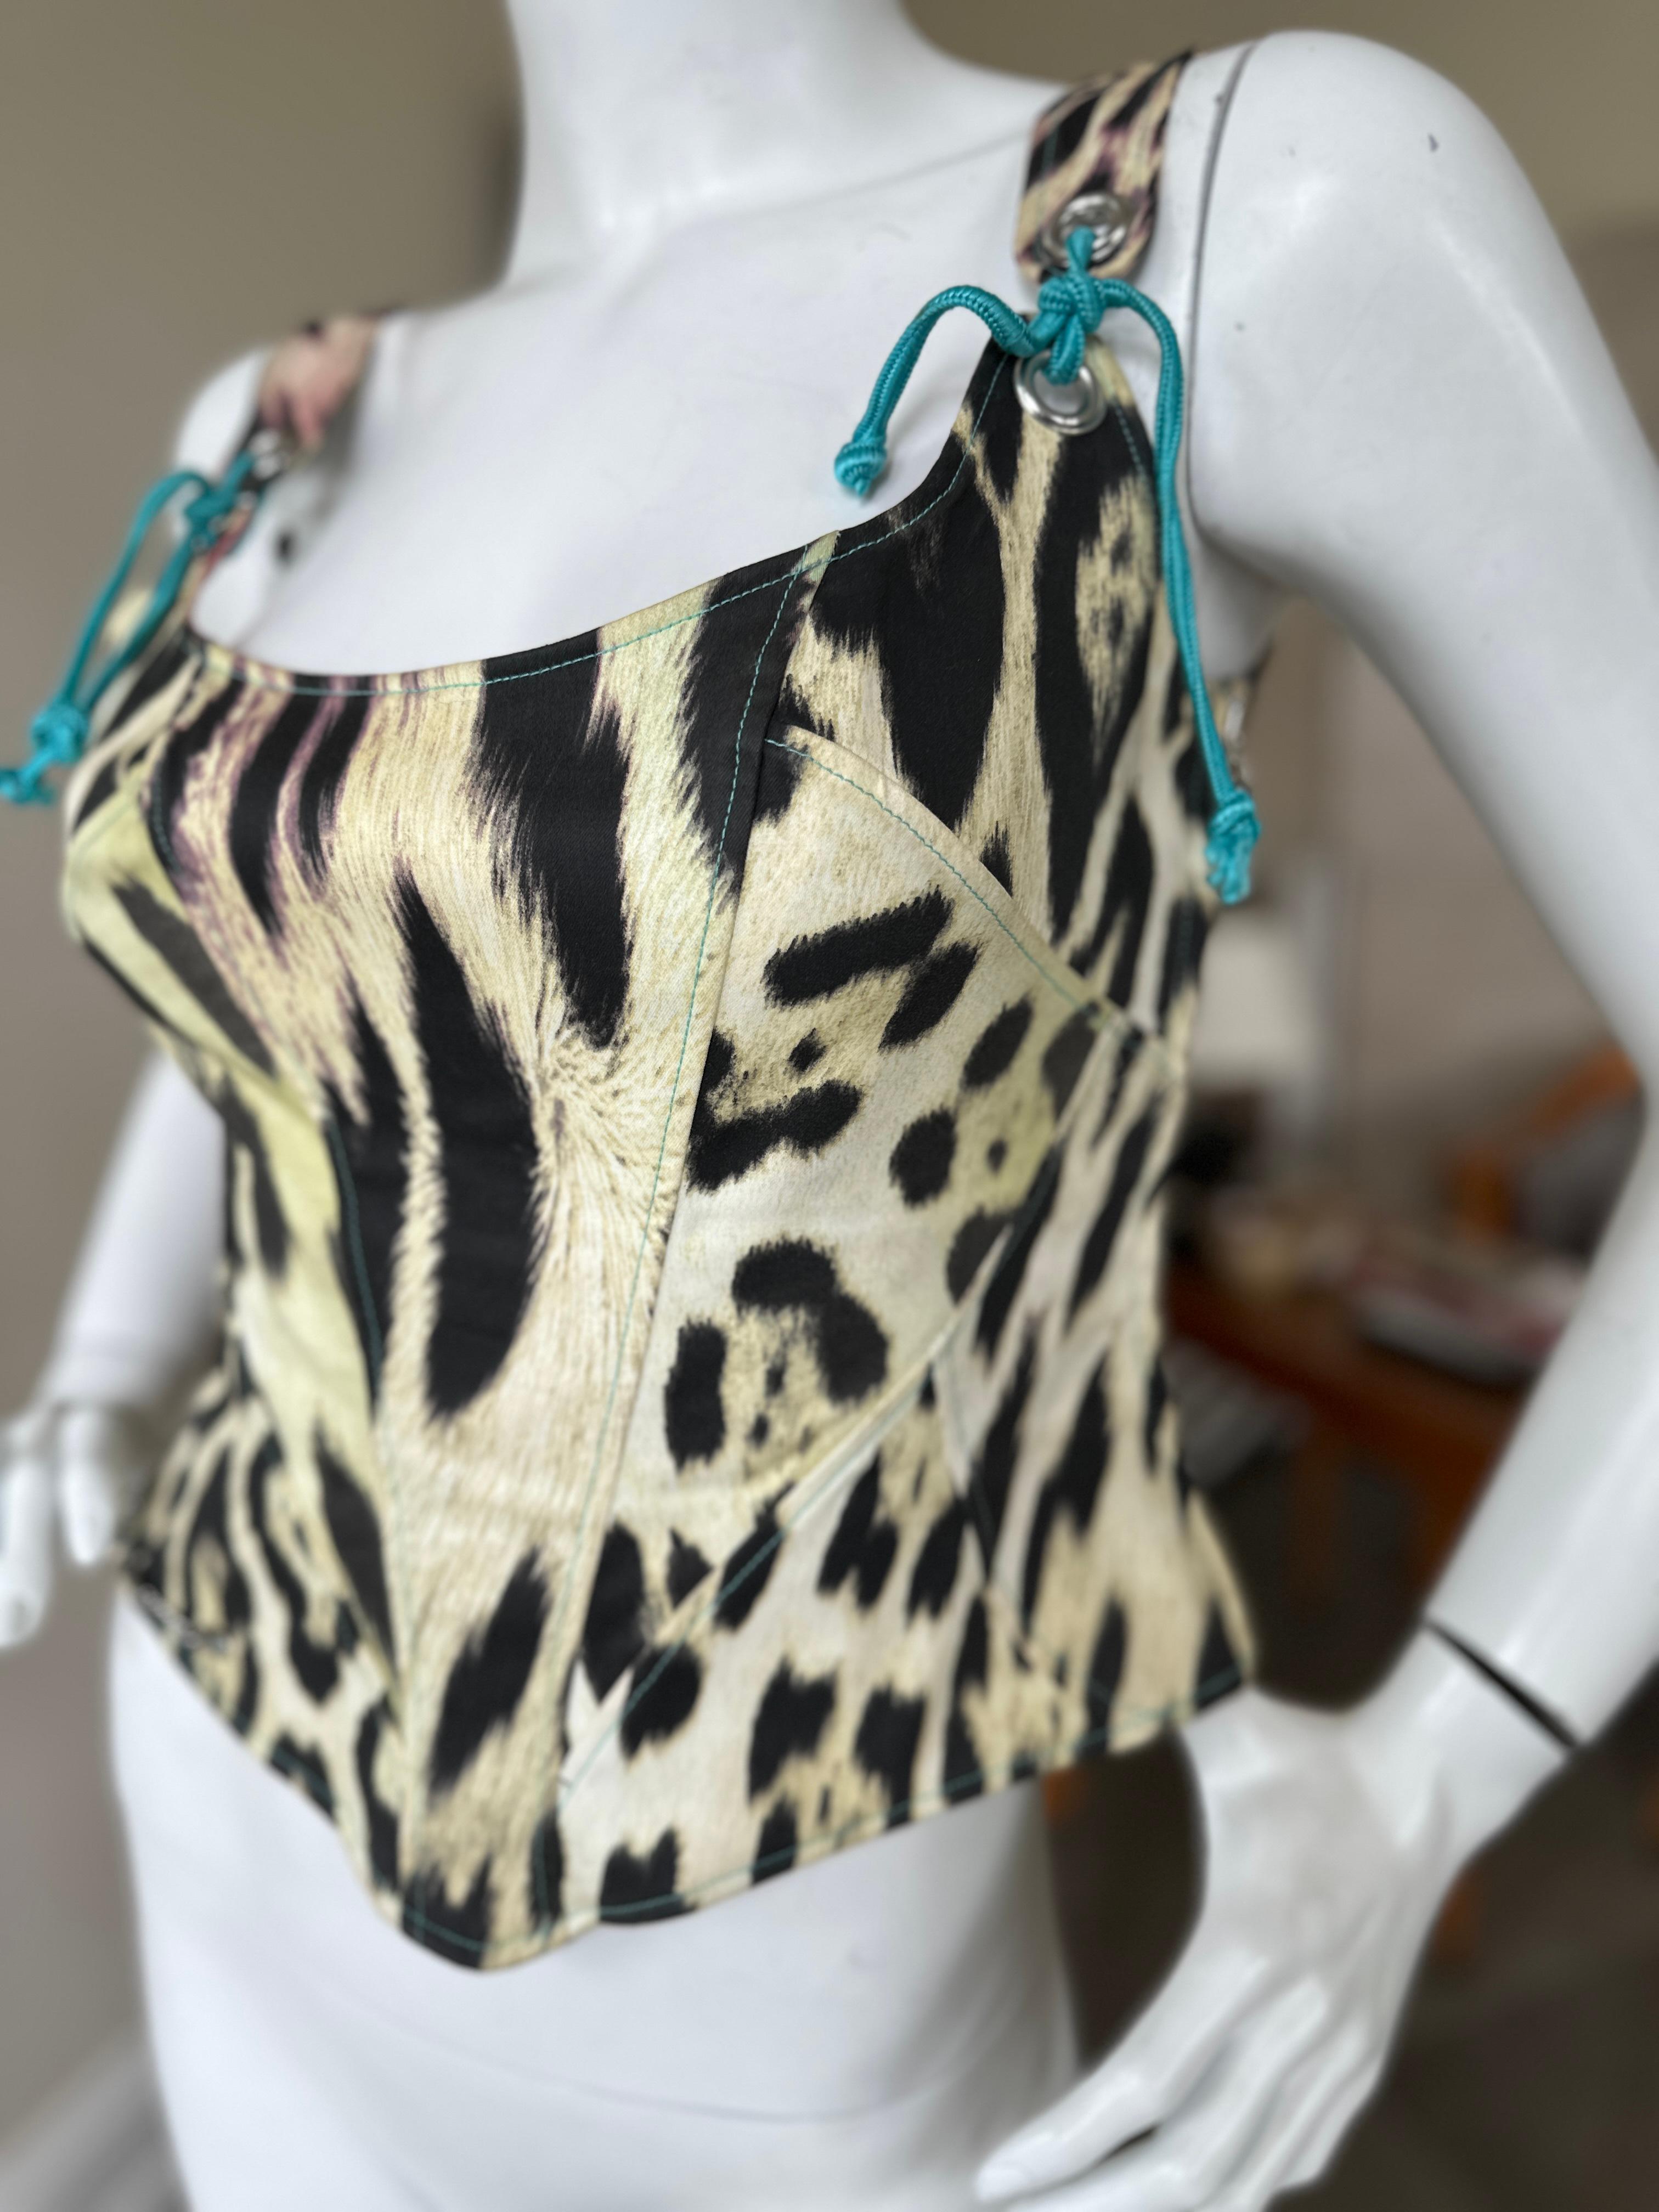 Roberto Cavalli for Just Cavalli Zebra Print Corset with Lace Up Details  For Sale 1